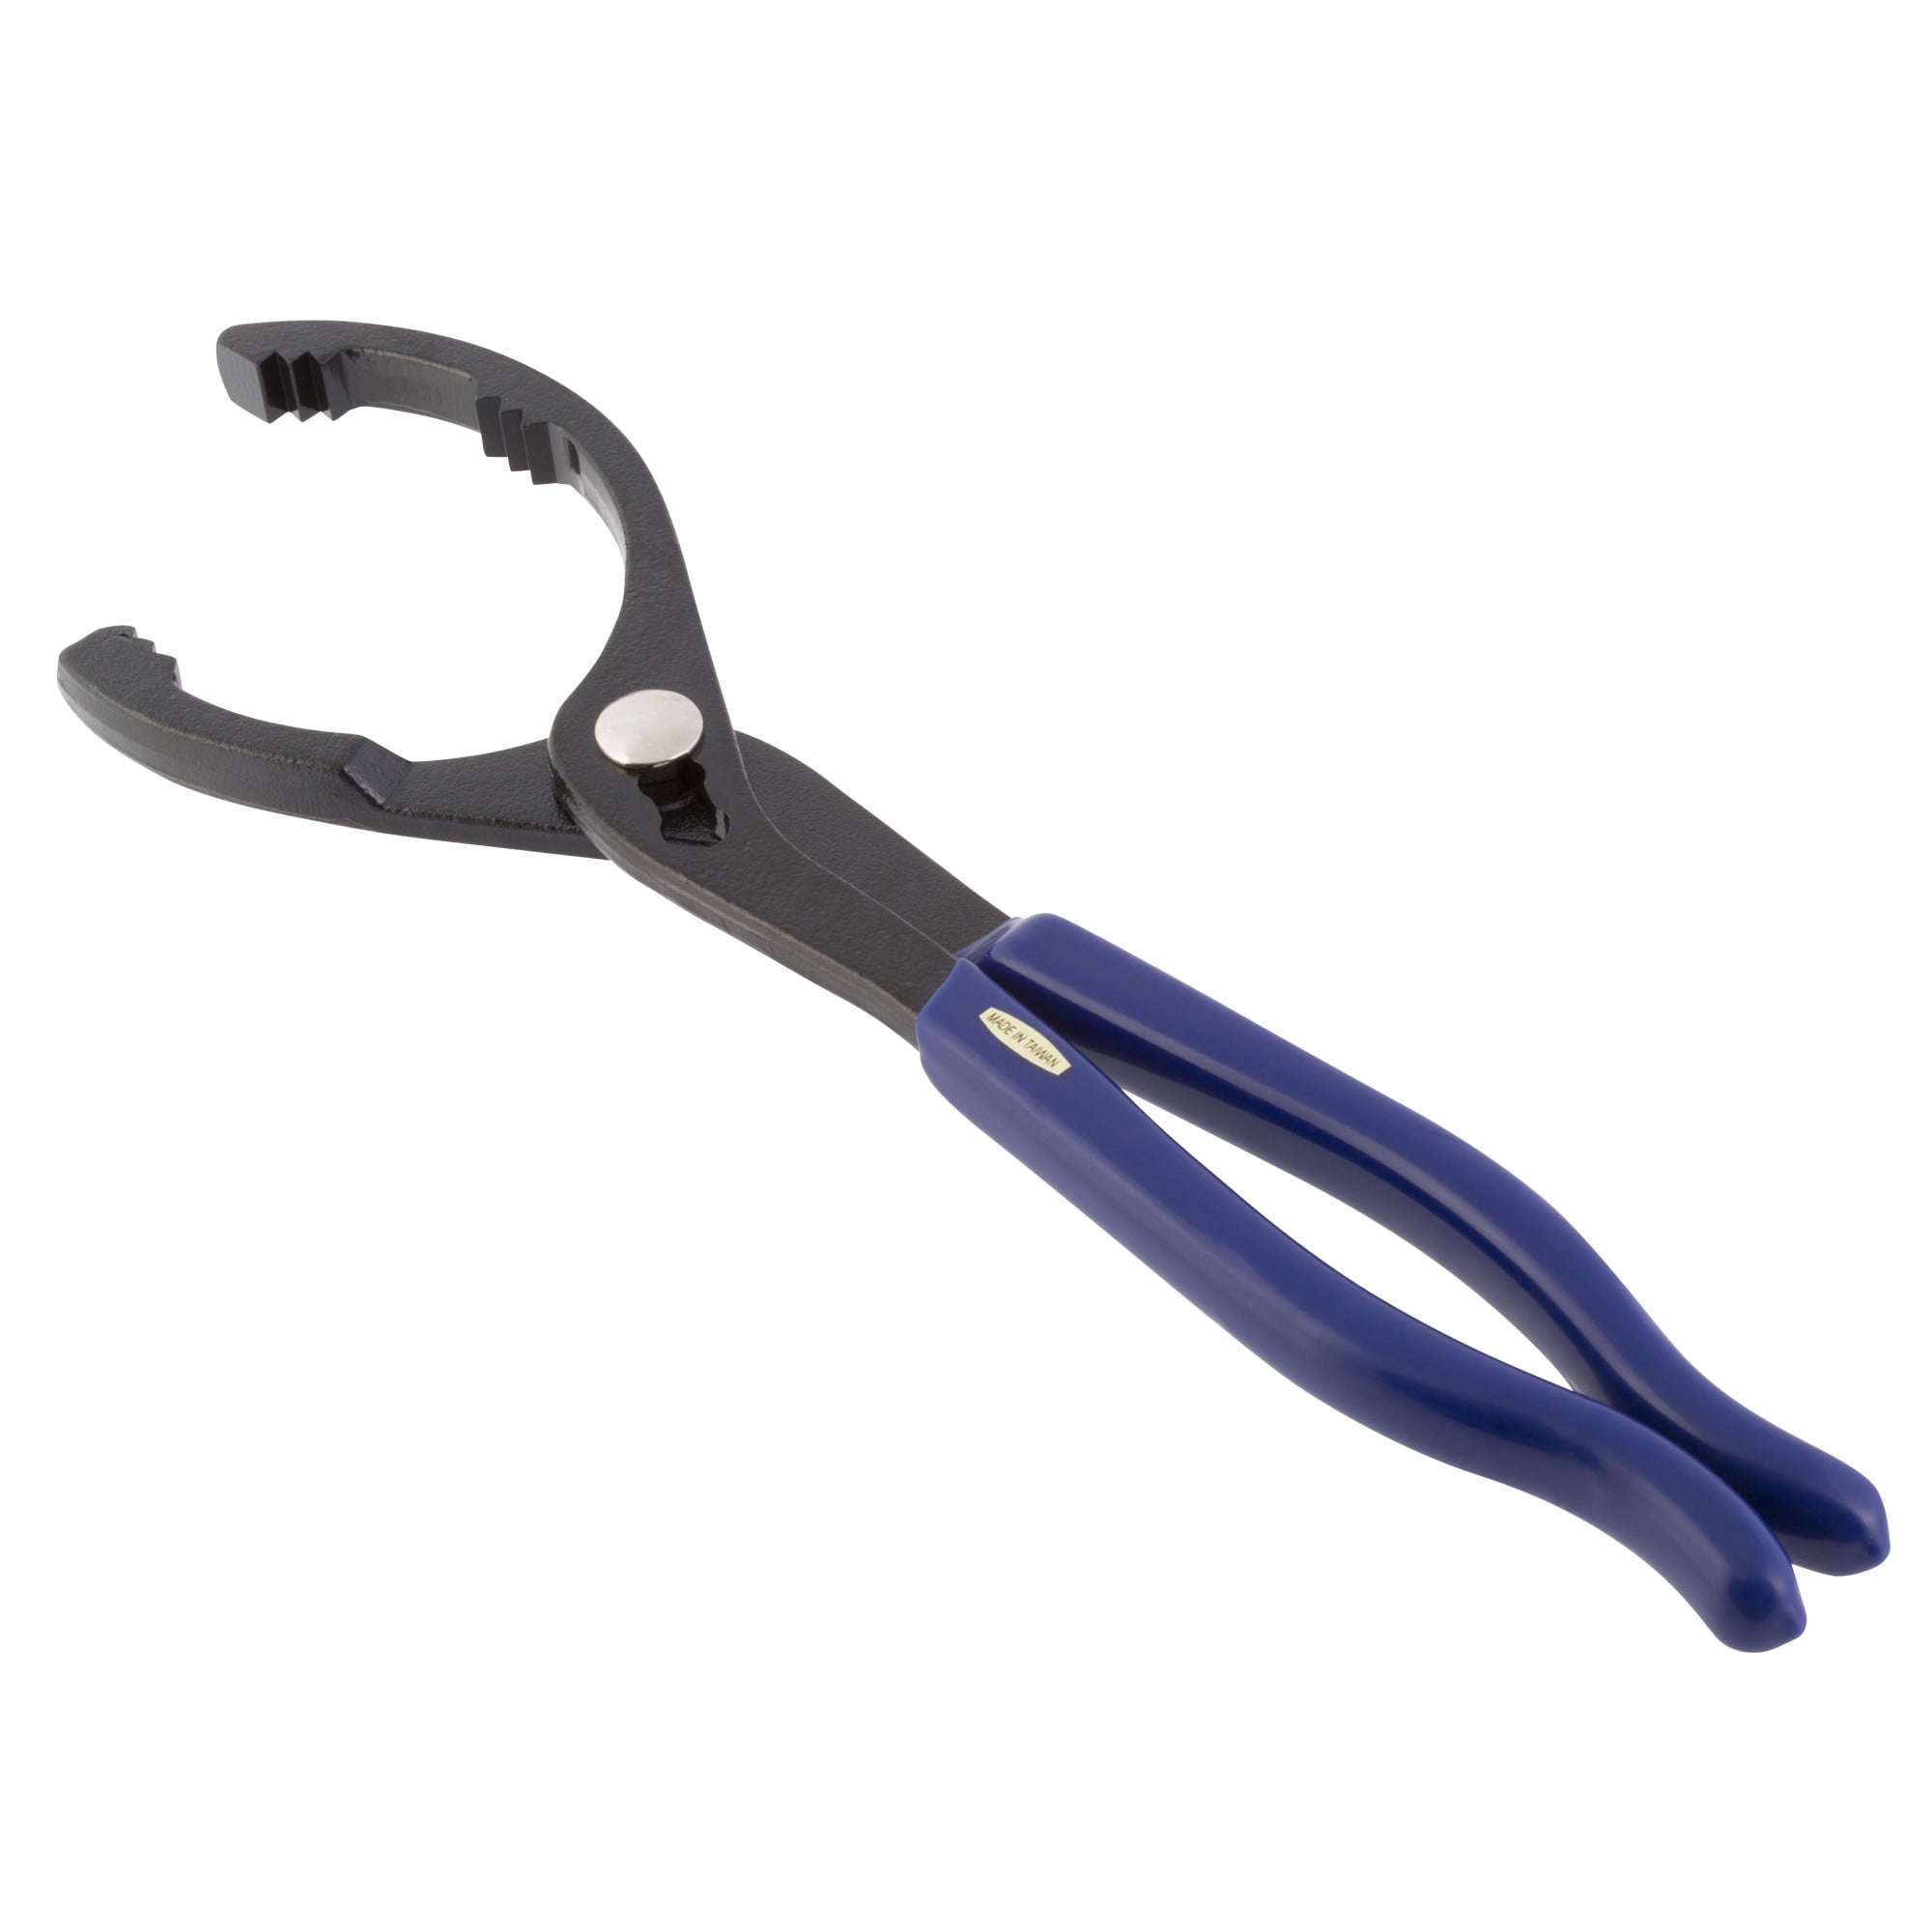 Steelman Large Adjustable Oil Fuel Filter Wrench Pliers Removal Tool 06115 